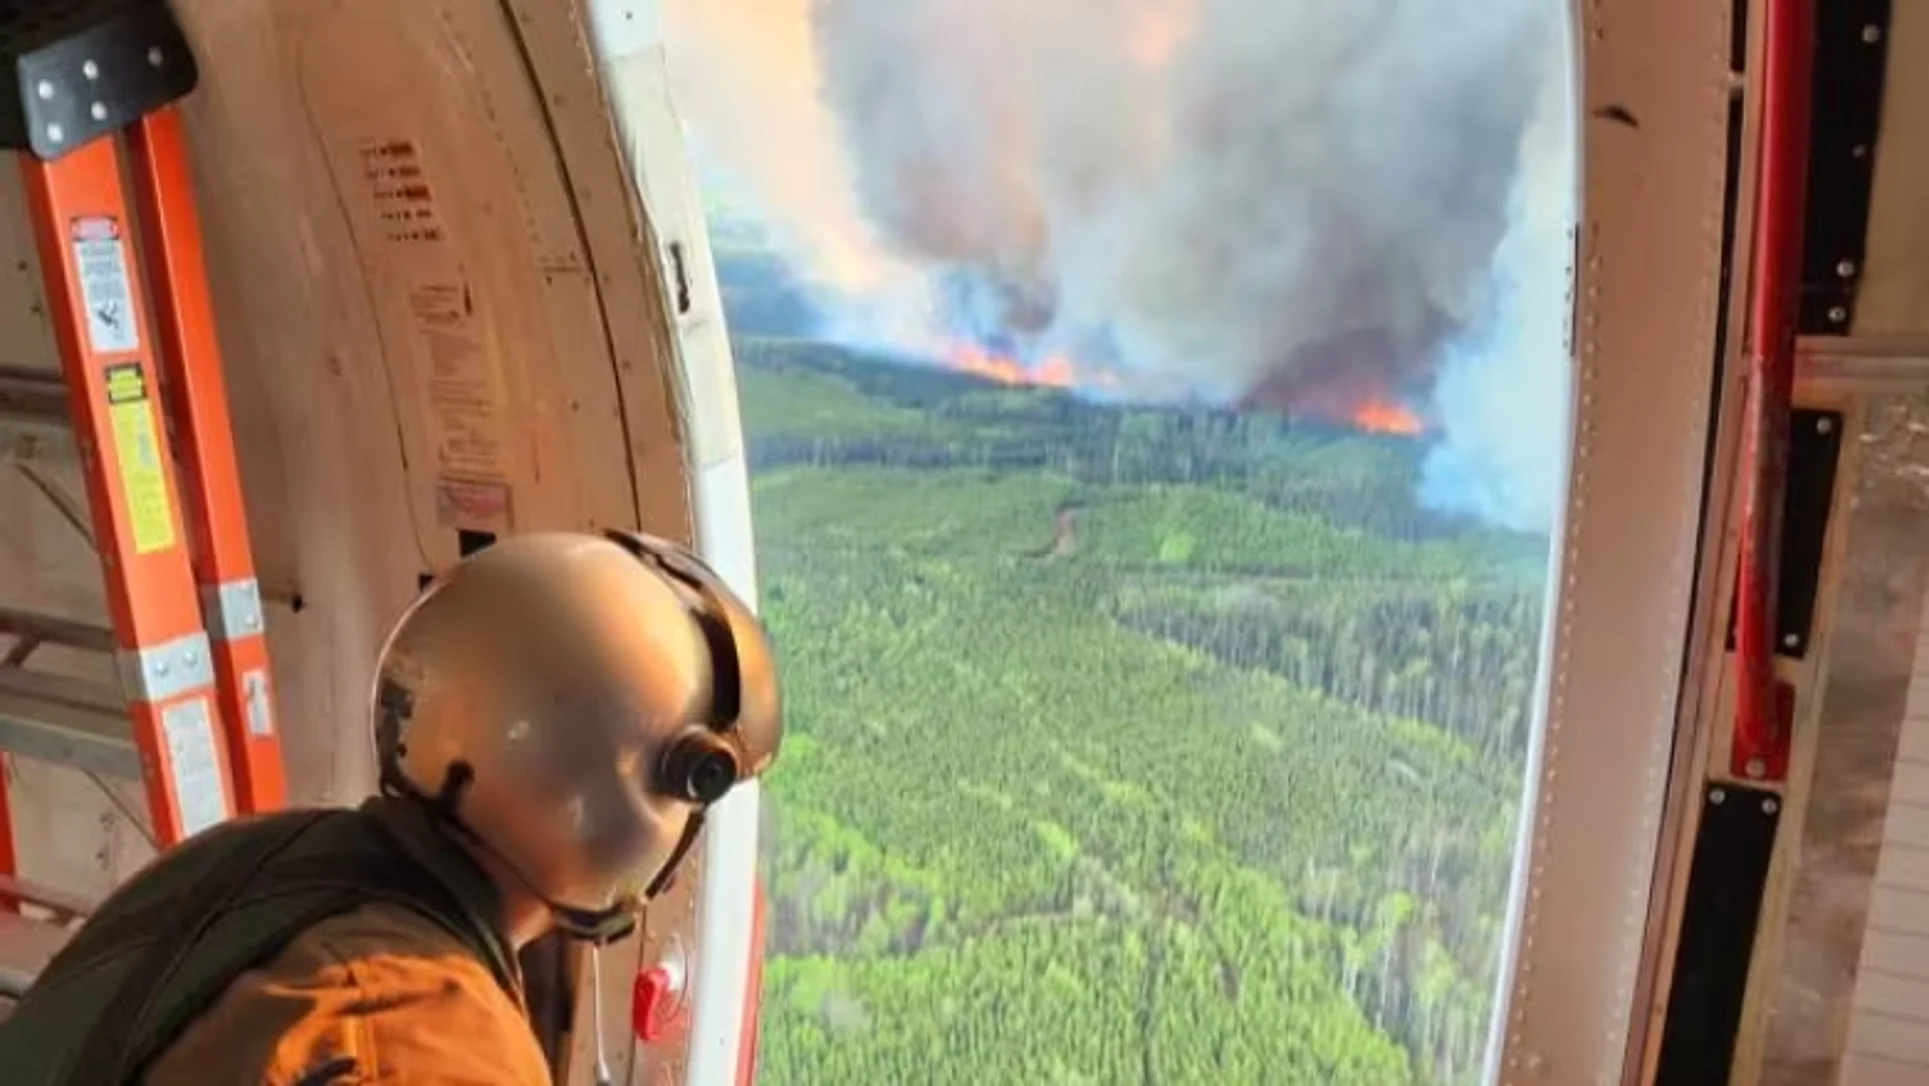 B.C. extending state of emergency amid ongoing wildfire battle